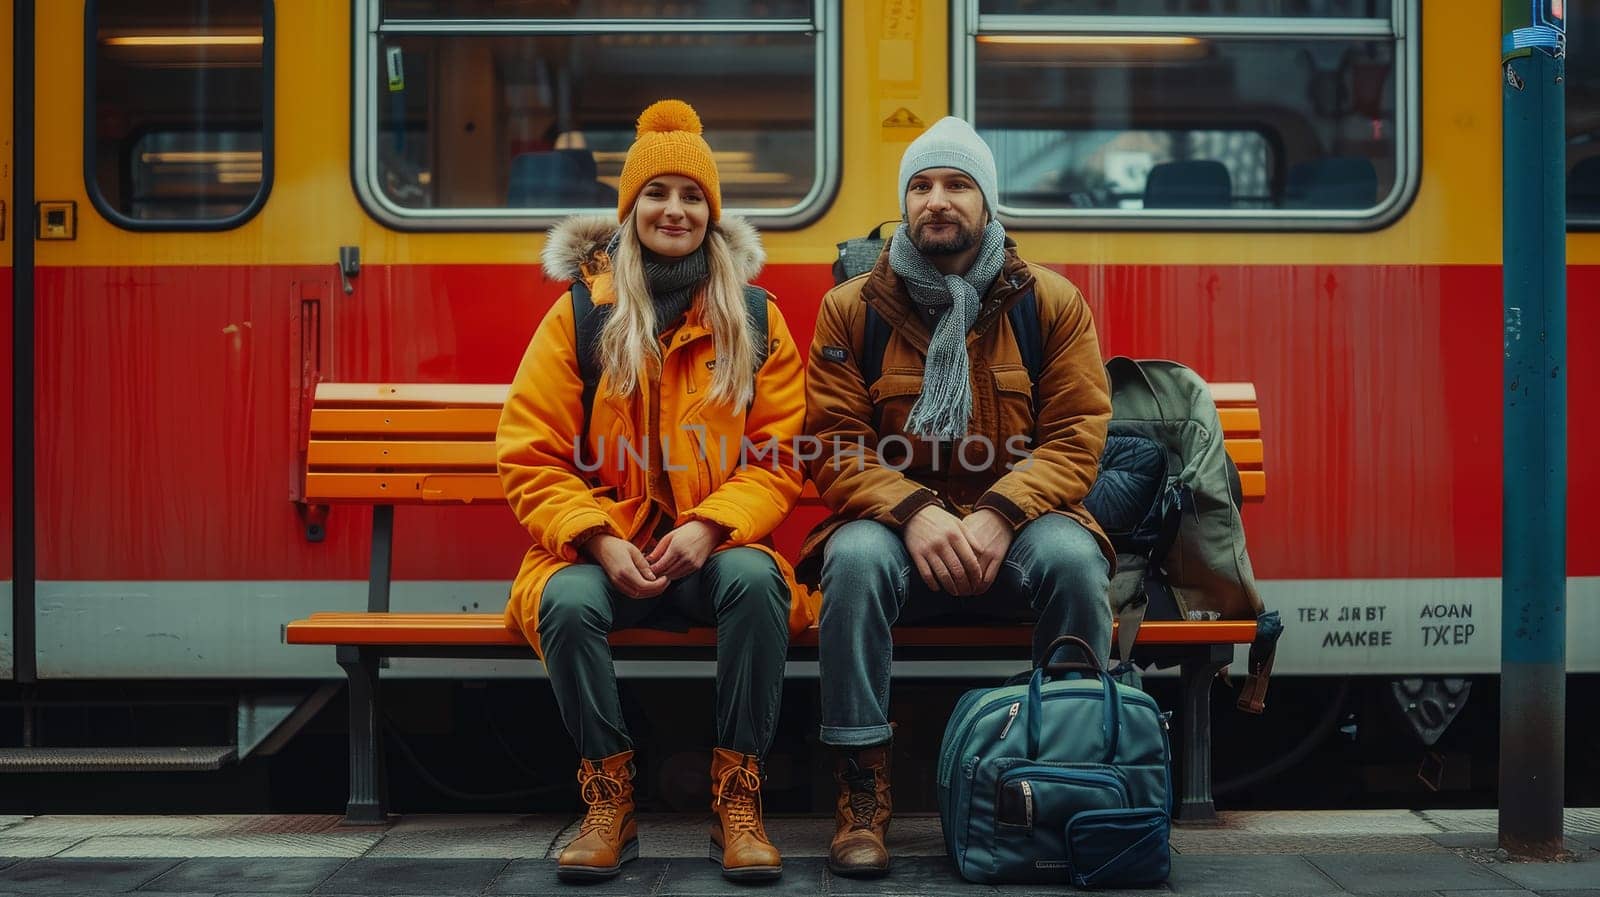 A couple sitting on a bench next to a train. The man is wearing a brown jacket and the woman is wearing a yellow jacket